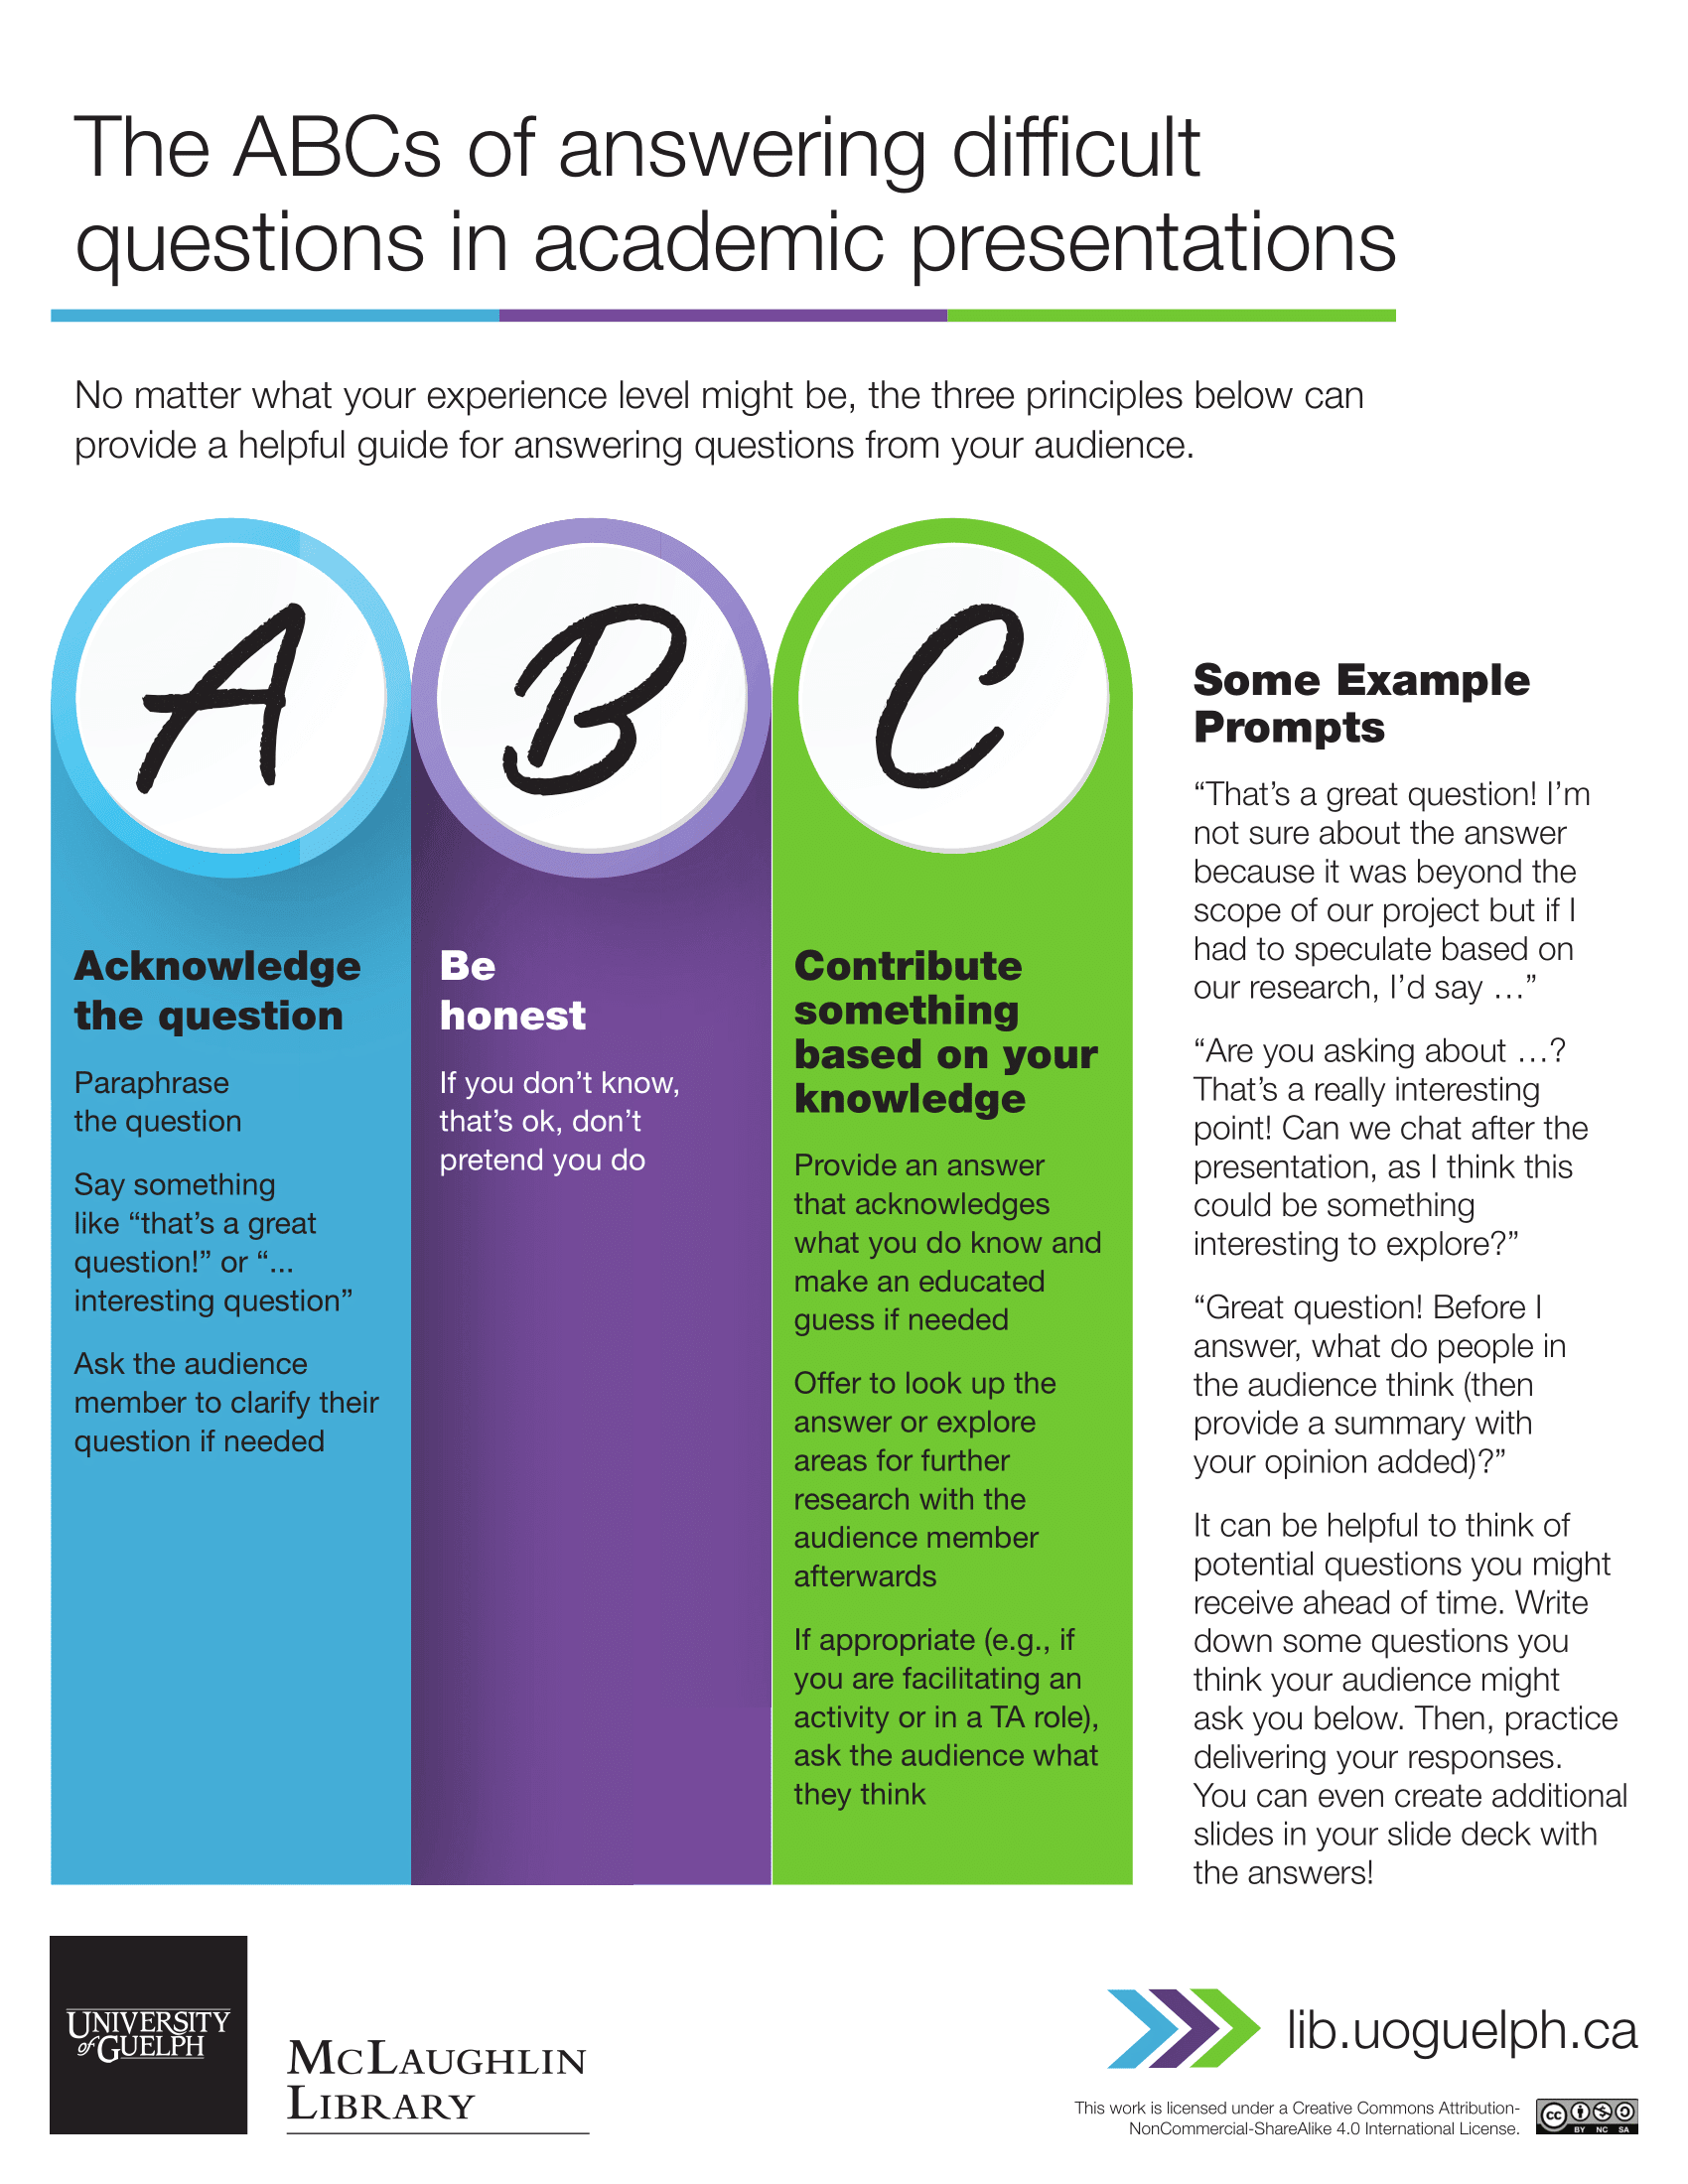 Handout: The ABCs of answering difficult questions in academic presentations